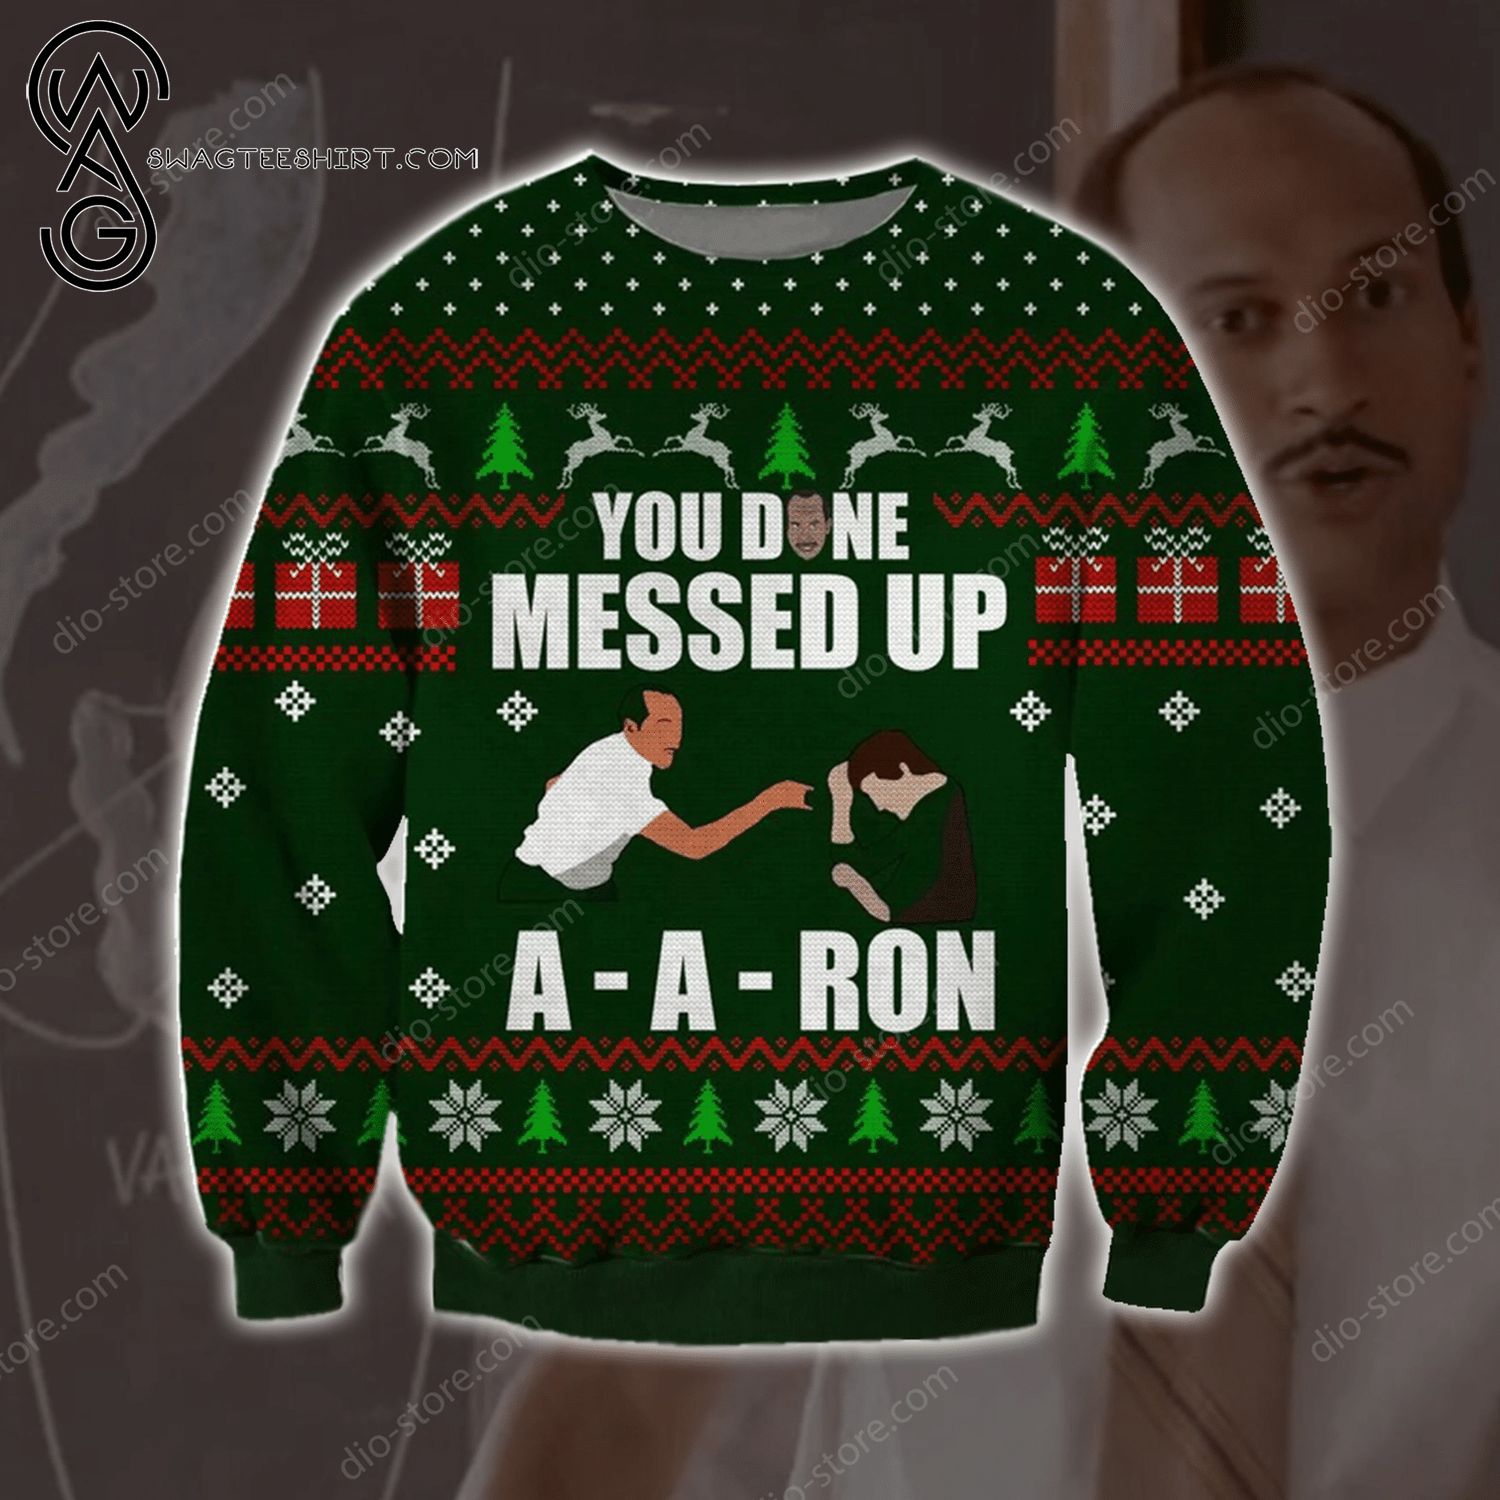 You Done Messed Up A-Aron Full Print Ugly Christmas Sweater